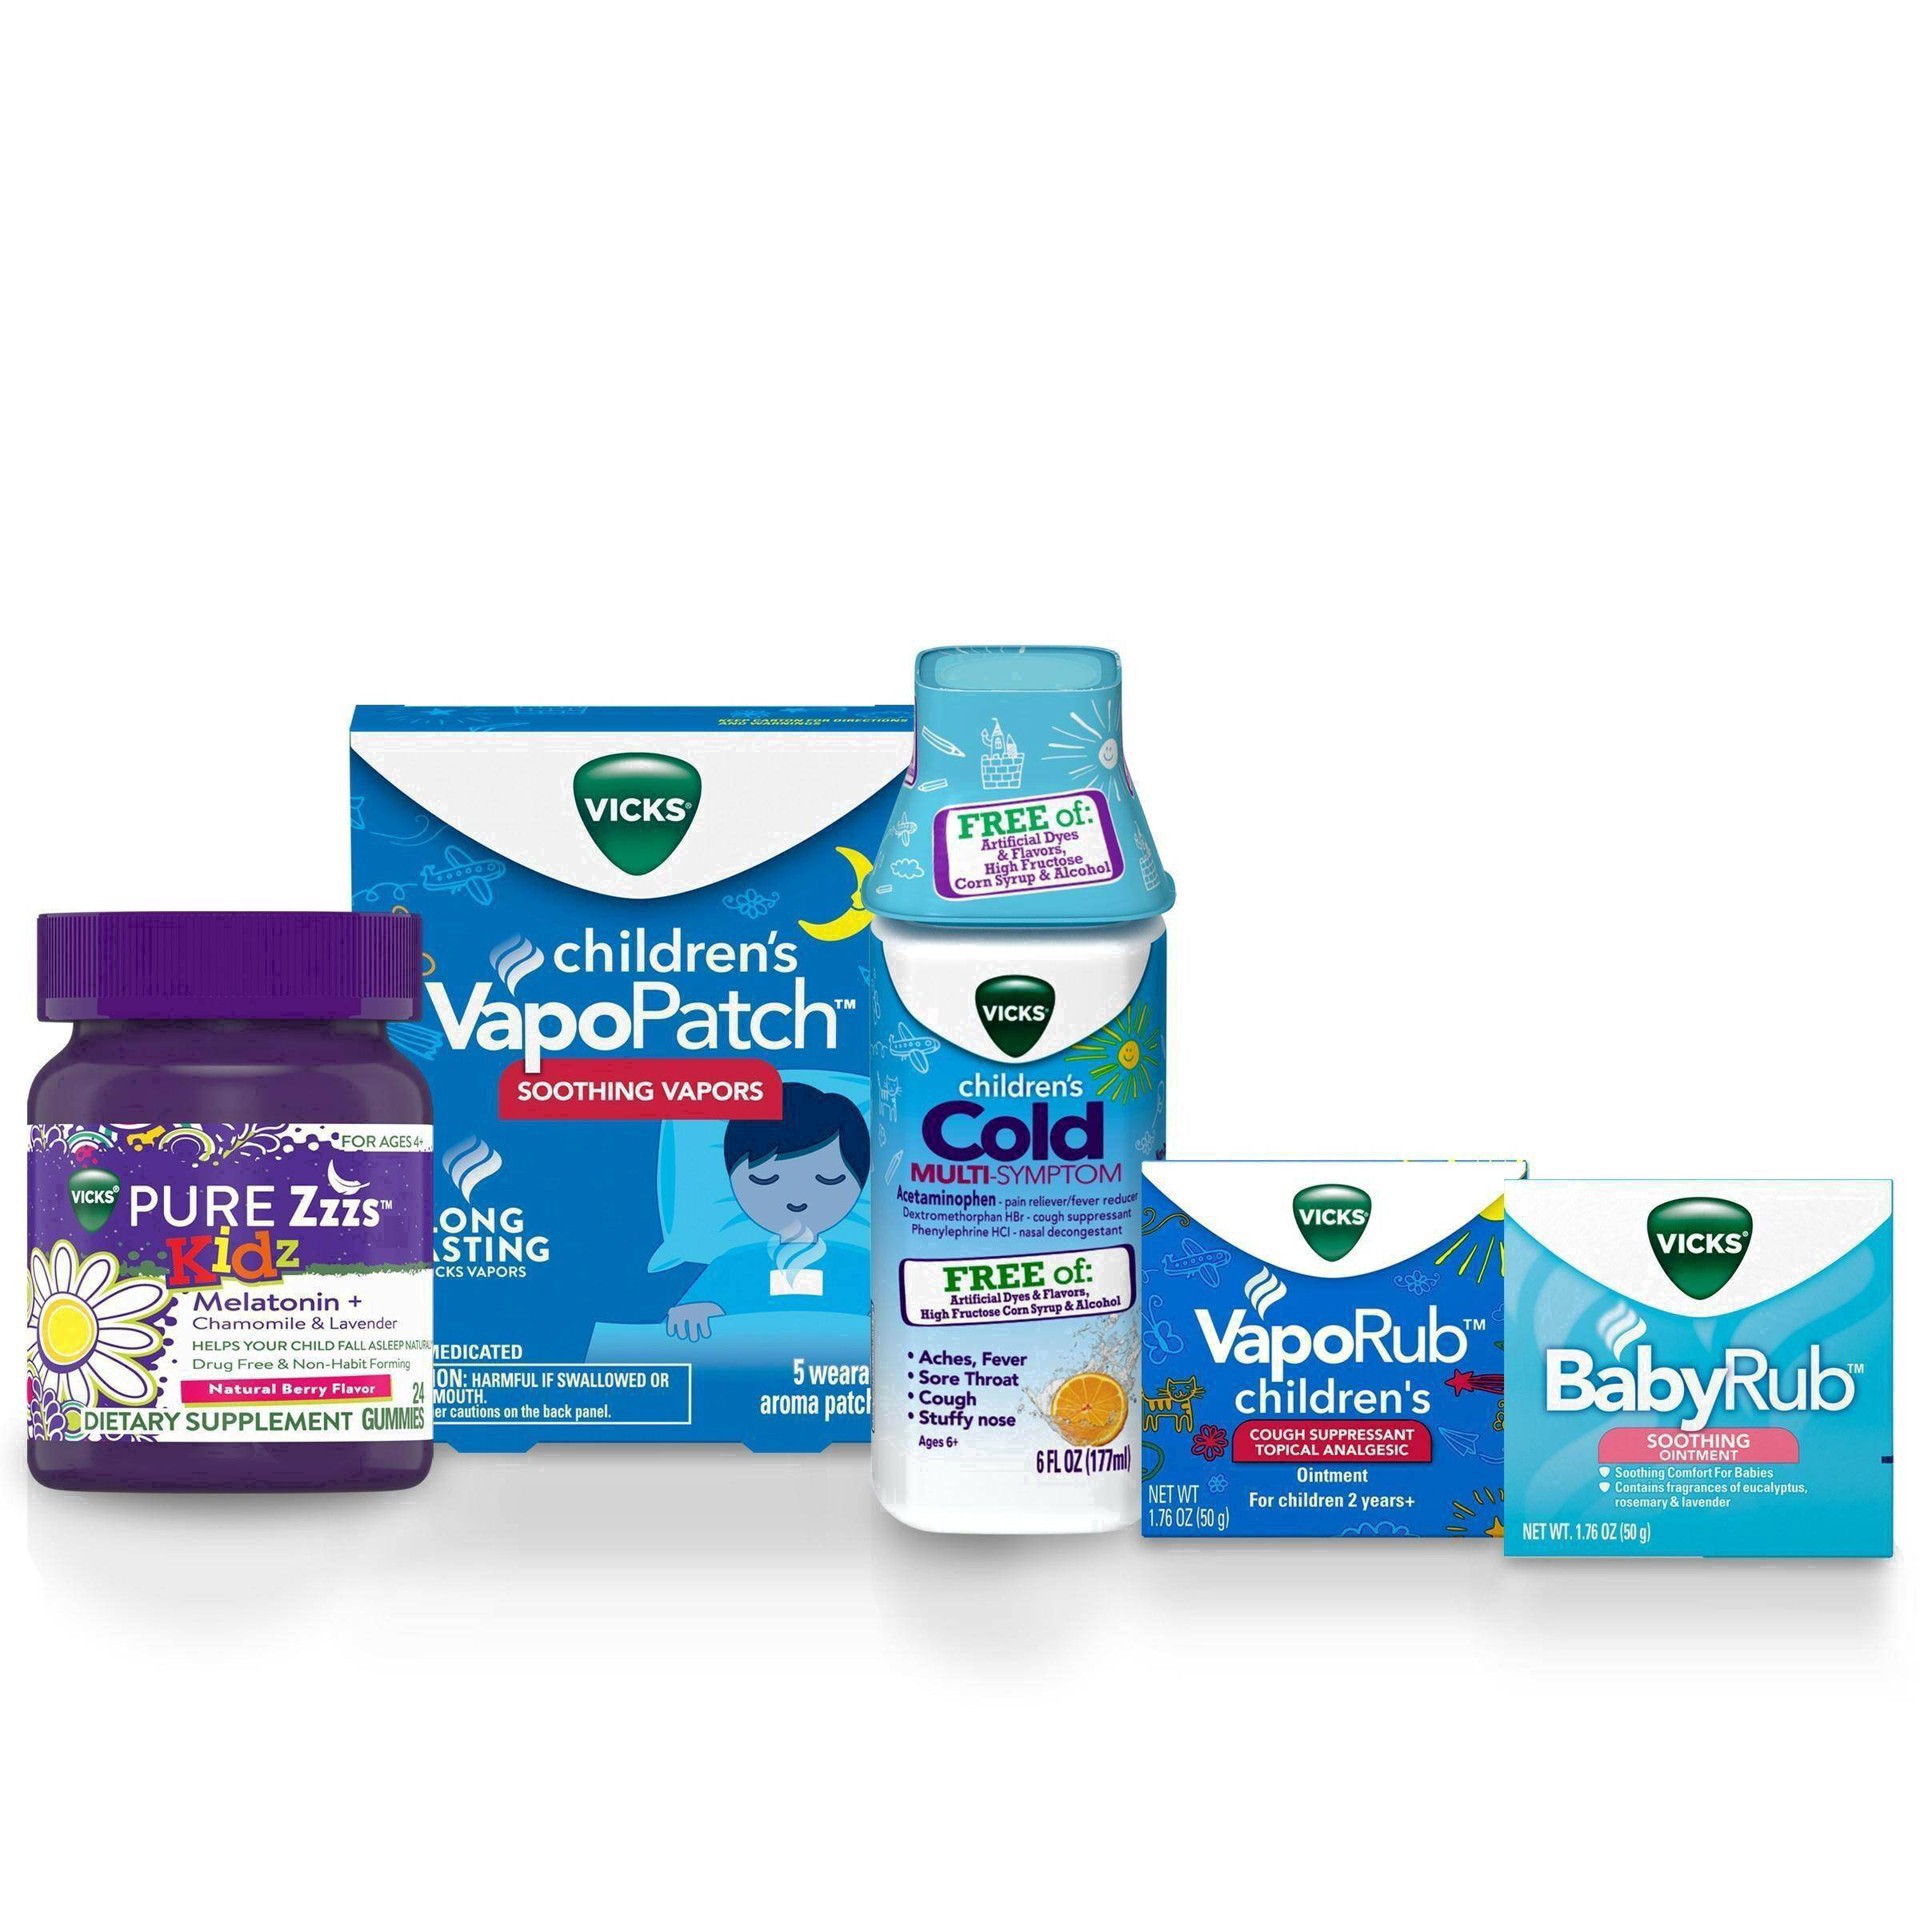 slide 34 of 37, Vicks Children's VapoPatch with Long Lasting Soothing Vapors - Menthol - 5ct, 5 ct